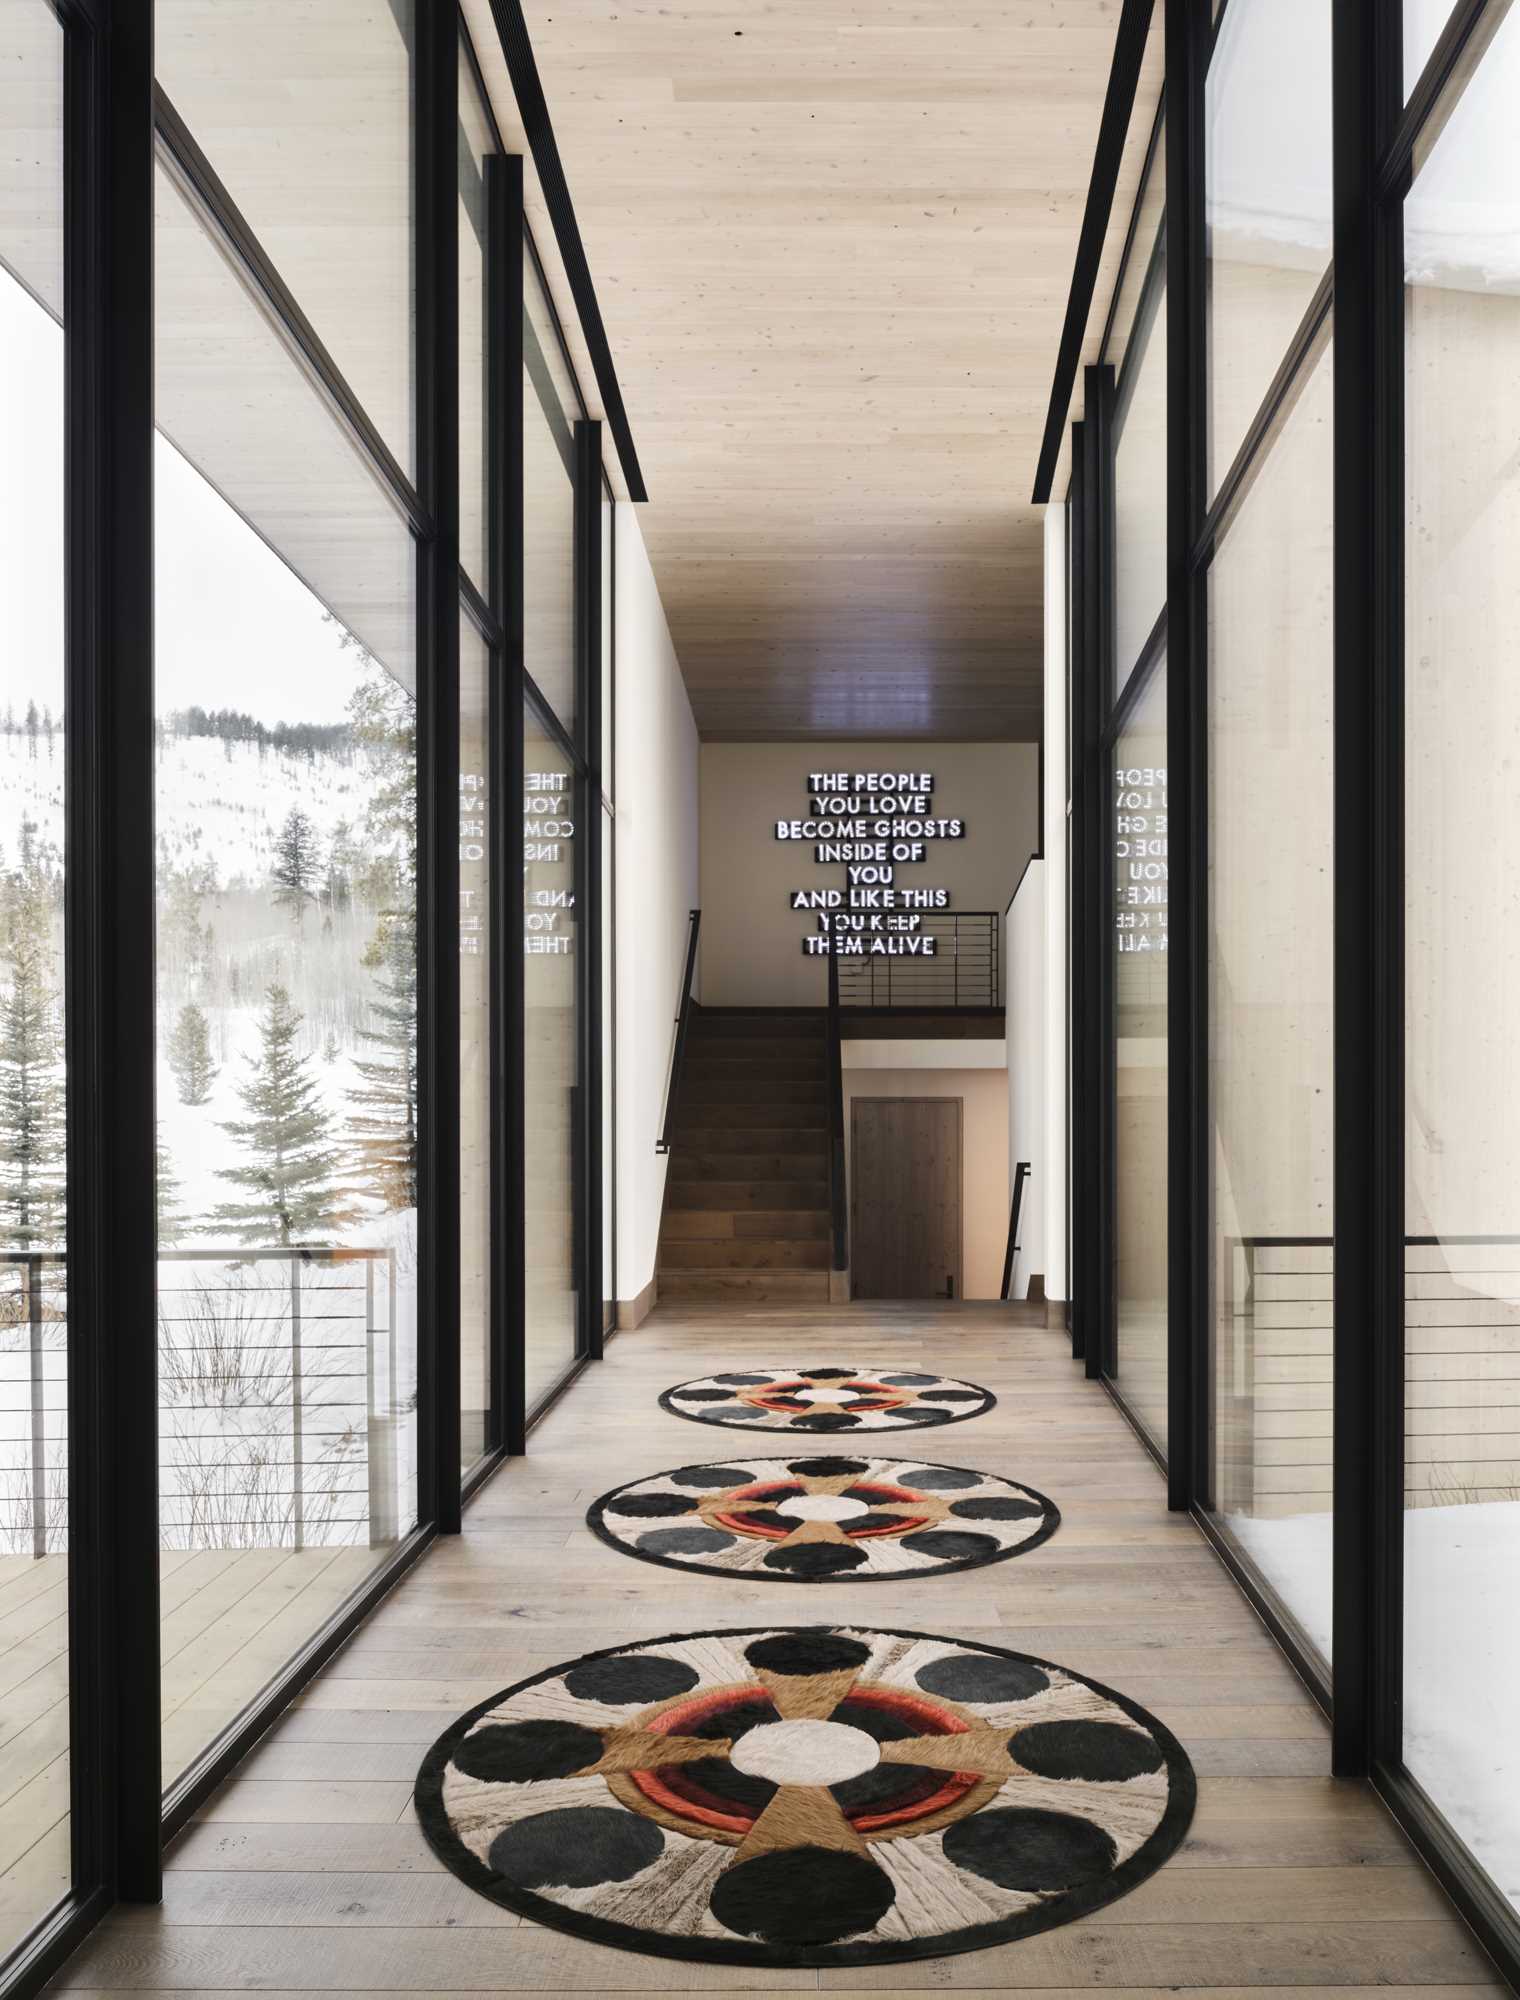 A double-height hallway with floor-to-ceiling windows with black frames showcase the surrounding views.